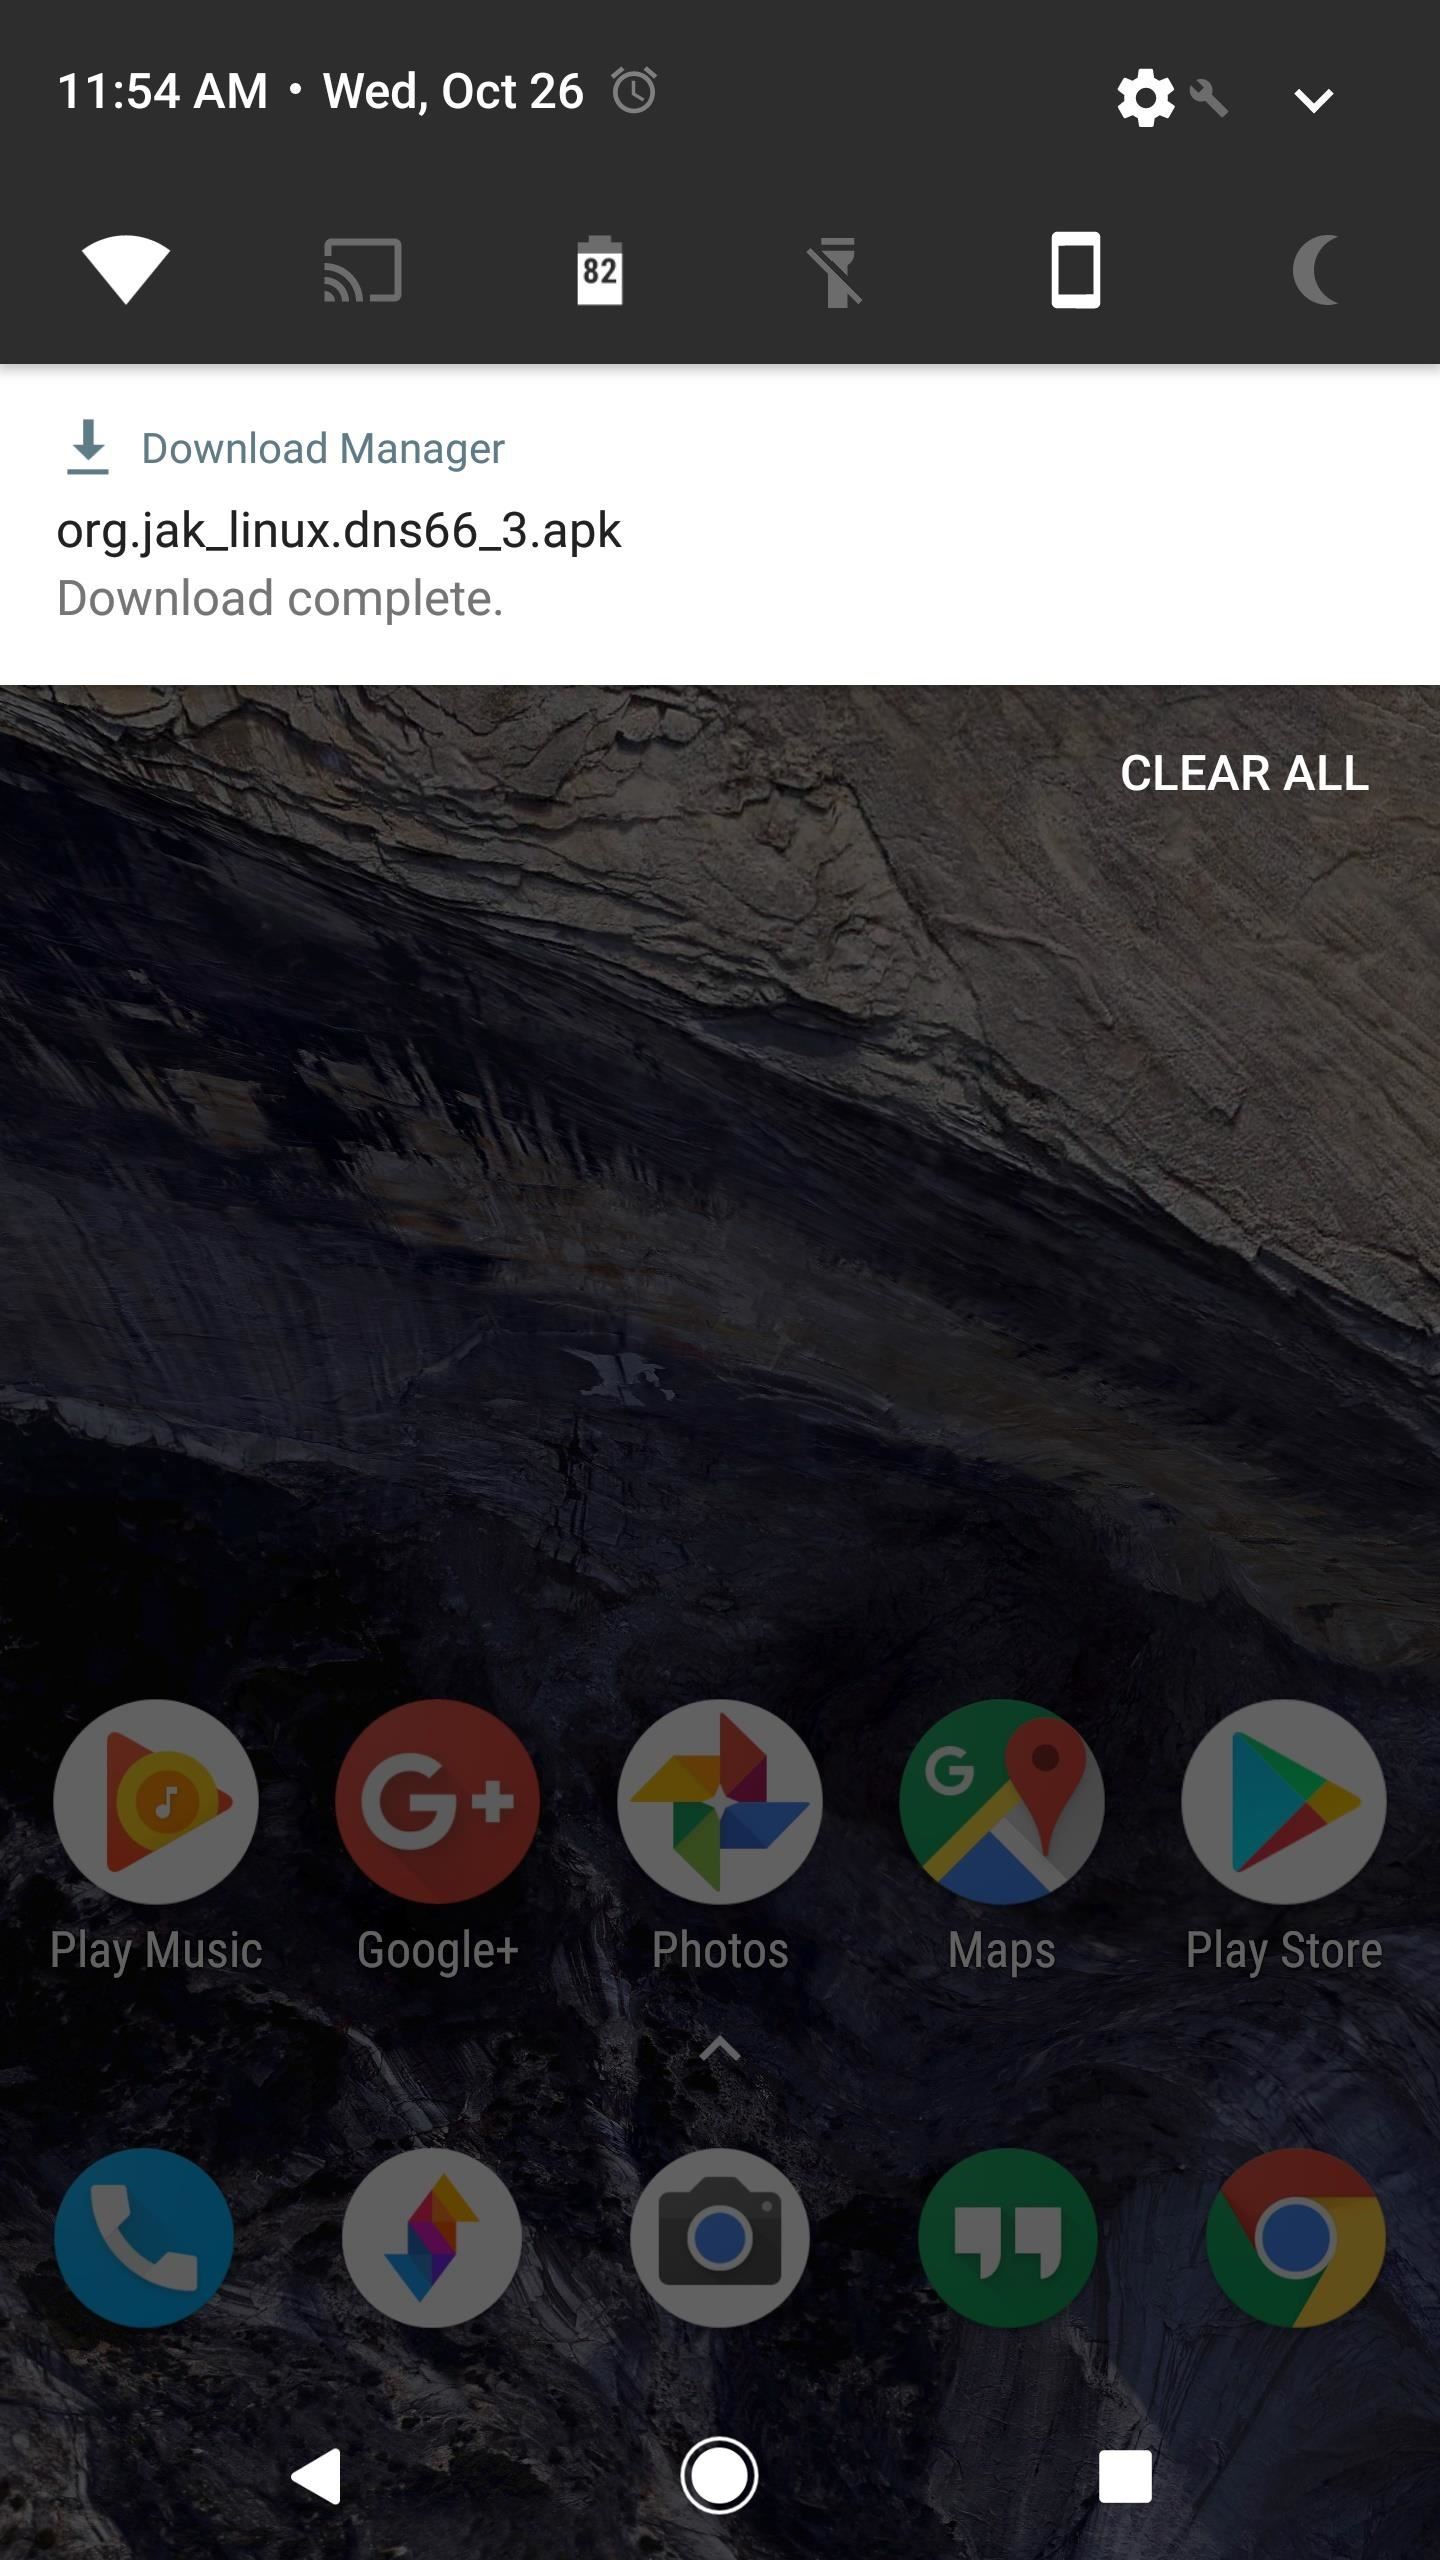 How to Block Ads in All Your Android Apps Without Root or Extra Battery Drain